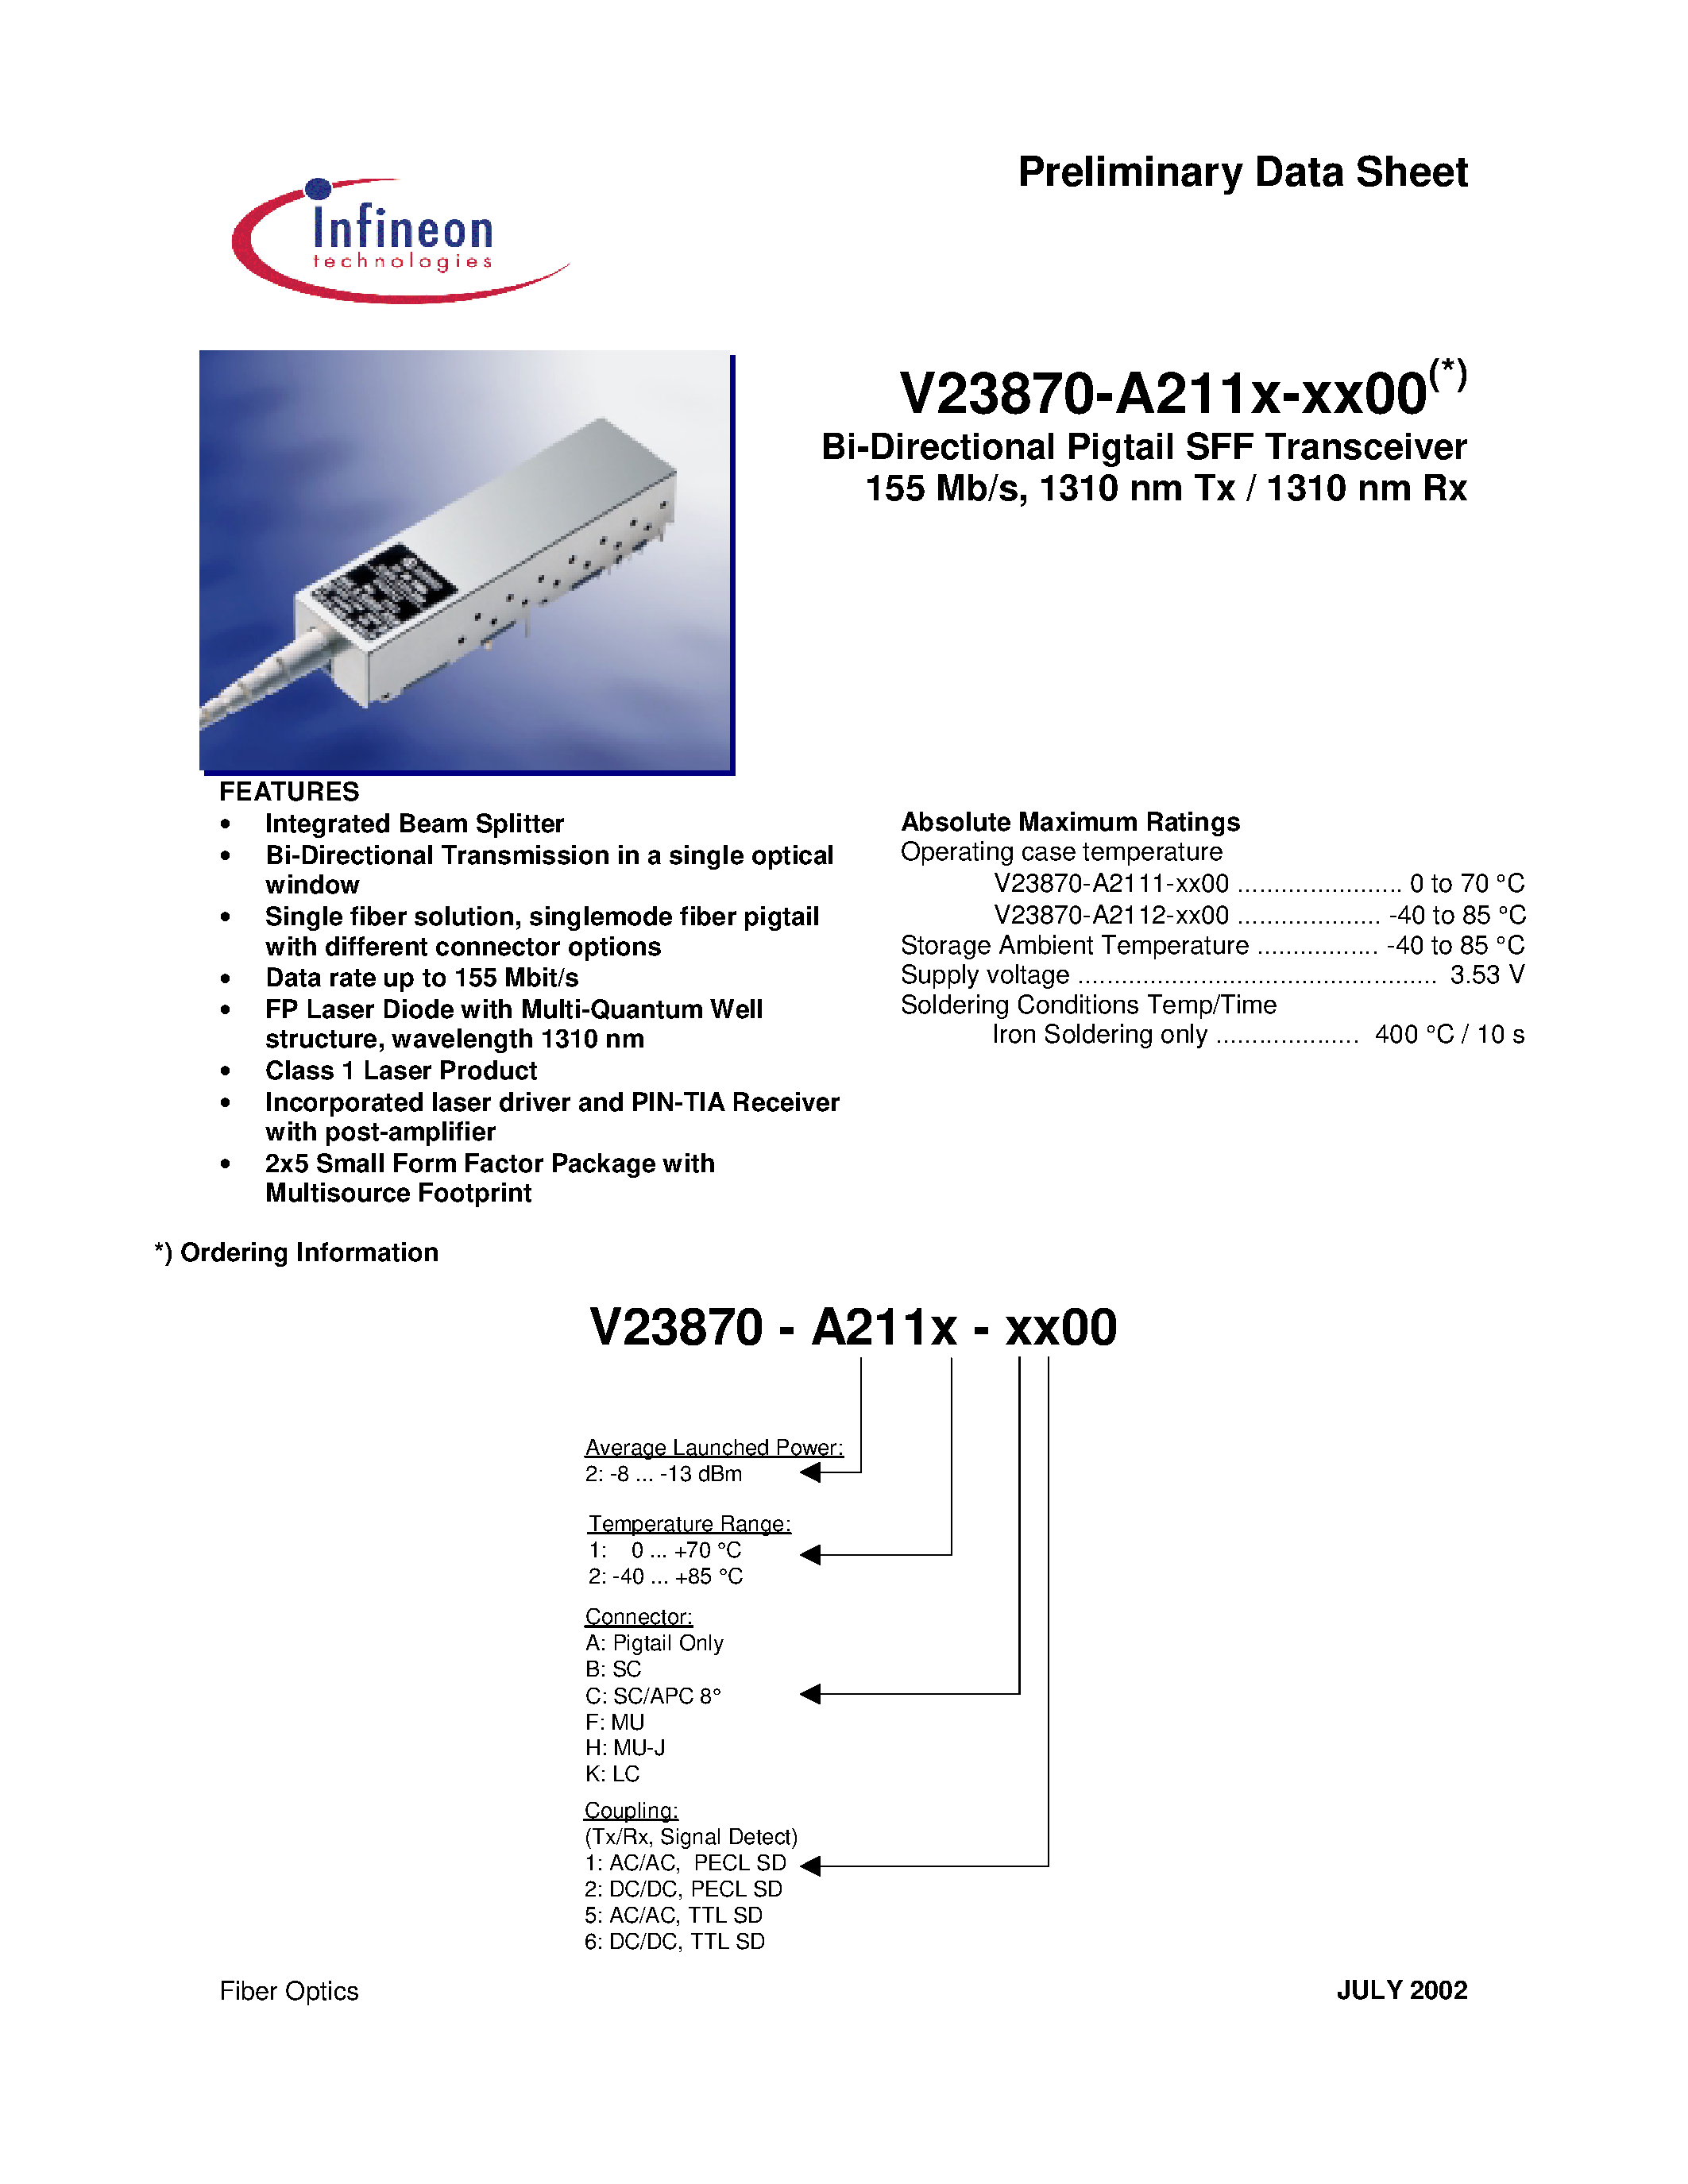 Datasheet V23870-A2112-C100 - Bi-Directional Pigtail SFF Transceiver 155 Mb/s/ 1310 nm Tx / 1310 nm Rx page 1